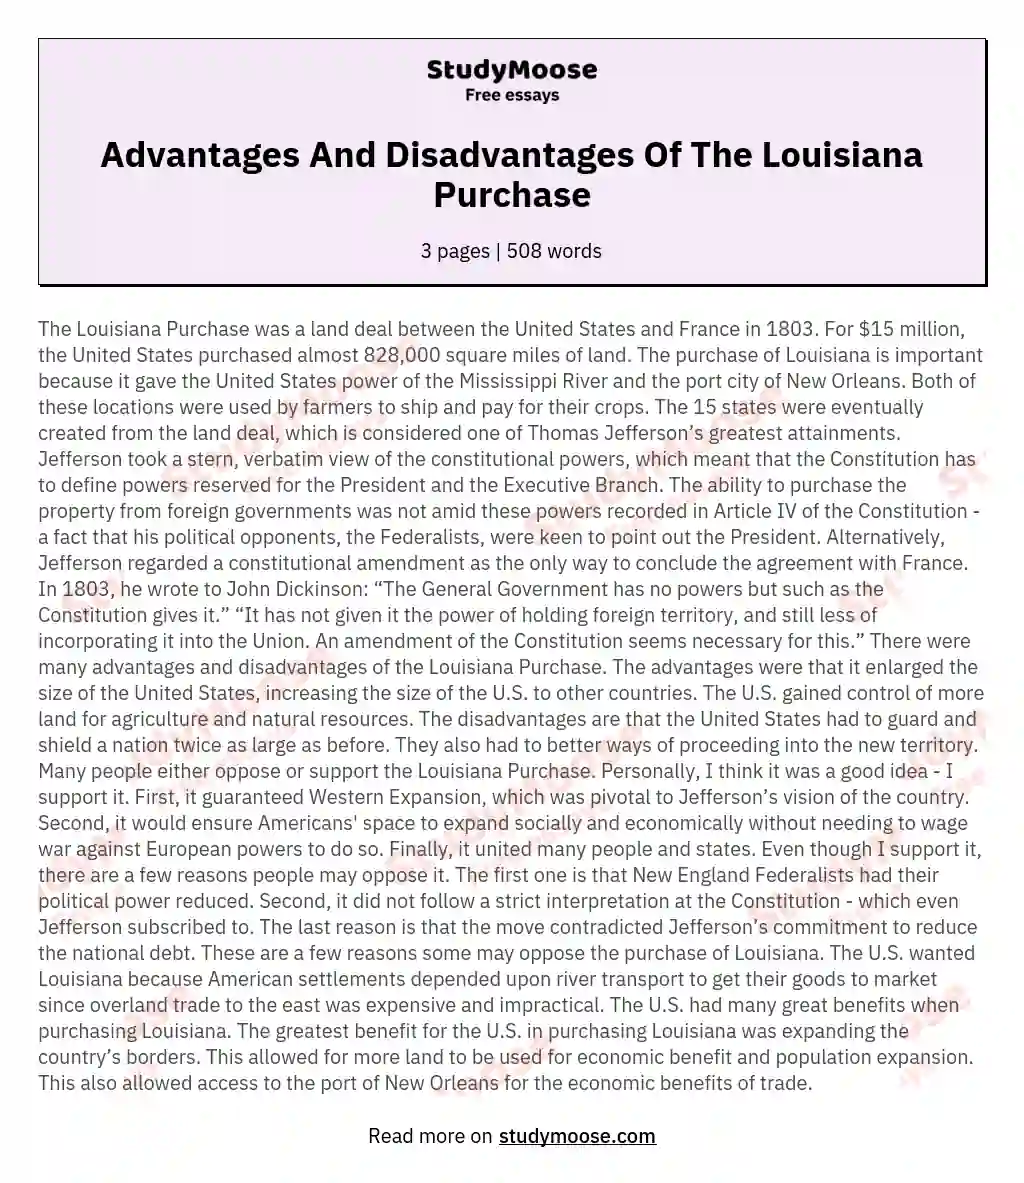 Advantages And Disadvantages Of The Louisiana Purchase essay